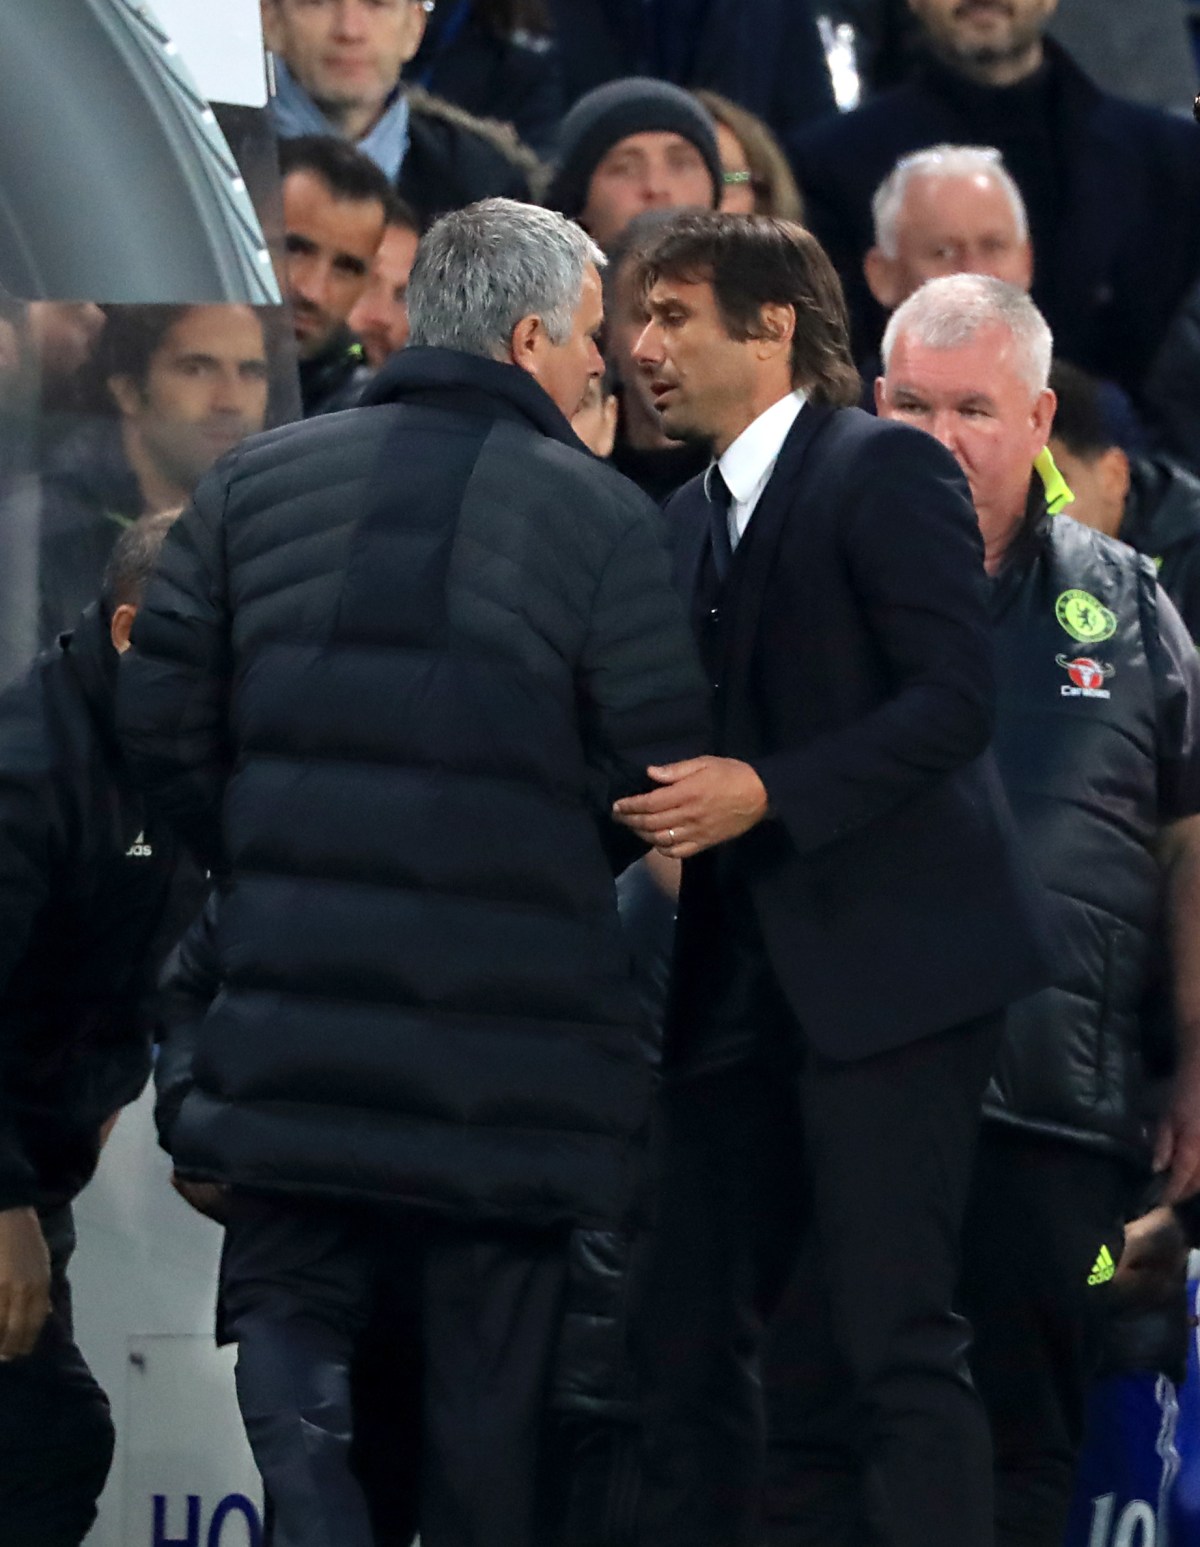 Manchester United manager Jose Mourinho (left) and Chelsea manager Antonio Conte shake hands after the final whistle of the Premier League match at Stamford Bridge, London.. Picture date: Sunday October 23, 2016. See PA story SOCCER Chelsea. Photo credit should read: John Walton/PA Wire. RESTRICTIONS: EDITORIAL USE ONLY No use with unauthorised audio, video, data, fixture lists, club/league logos or "live" services. Online in-match use limited to 75 images, no video emulation. No use in betting, games or single club/league/player publications.